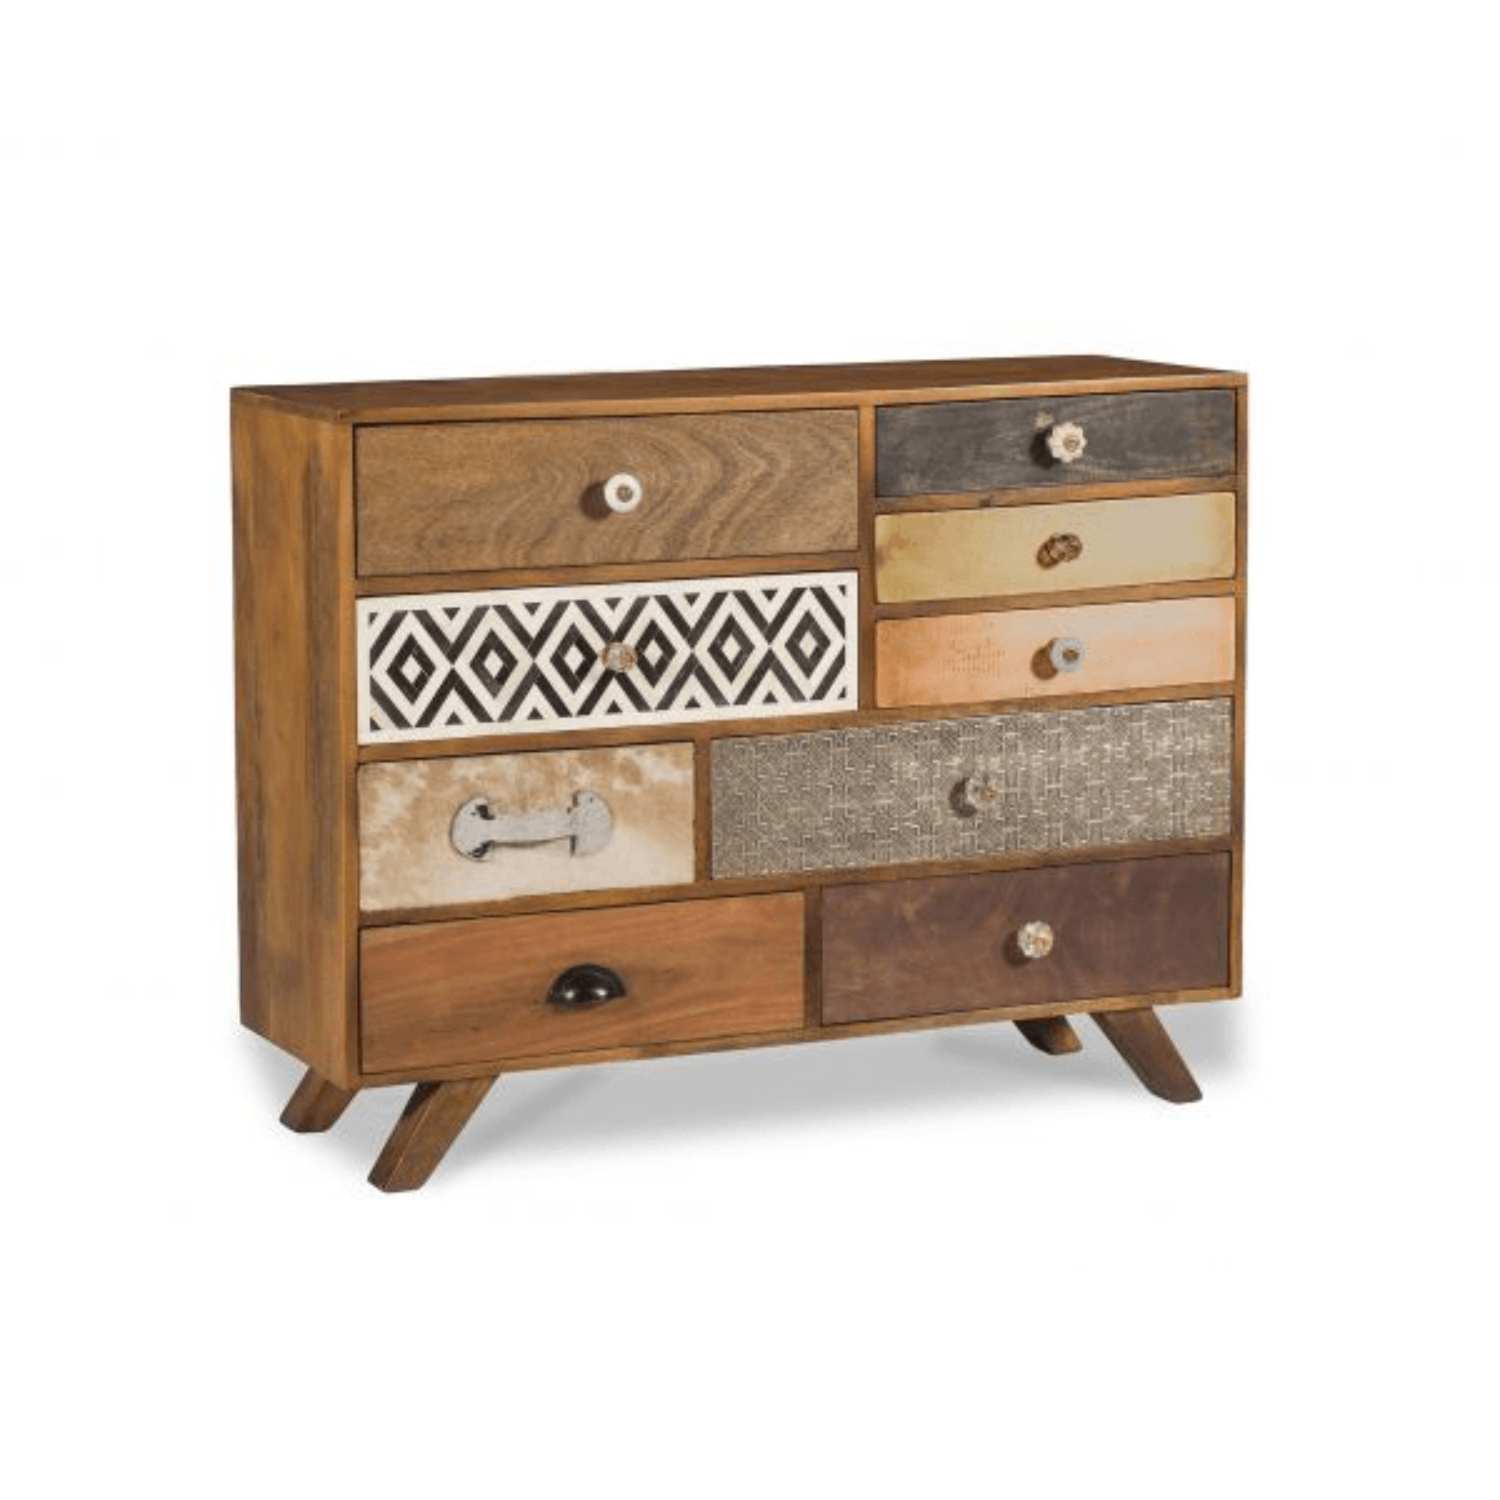 Distinque chest of drawers